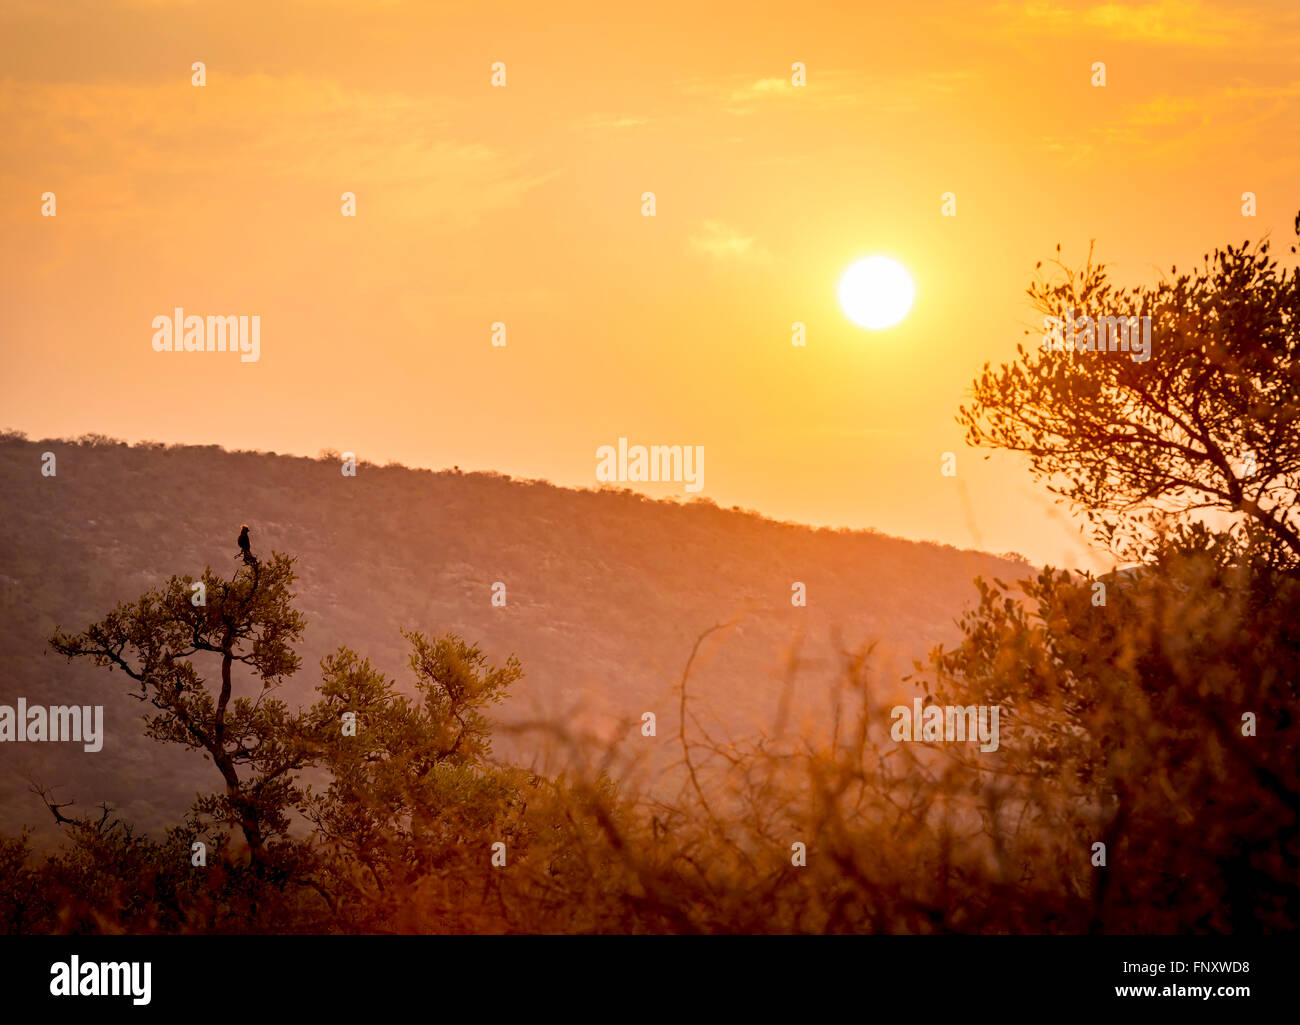 Sunset sky through trees and hills in Botswana, Africa, with a silhouetted bird watching the sun set Stock Photo